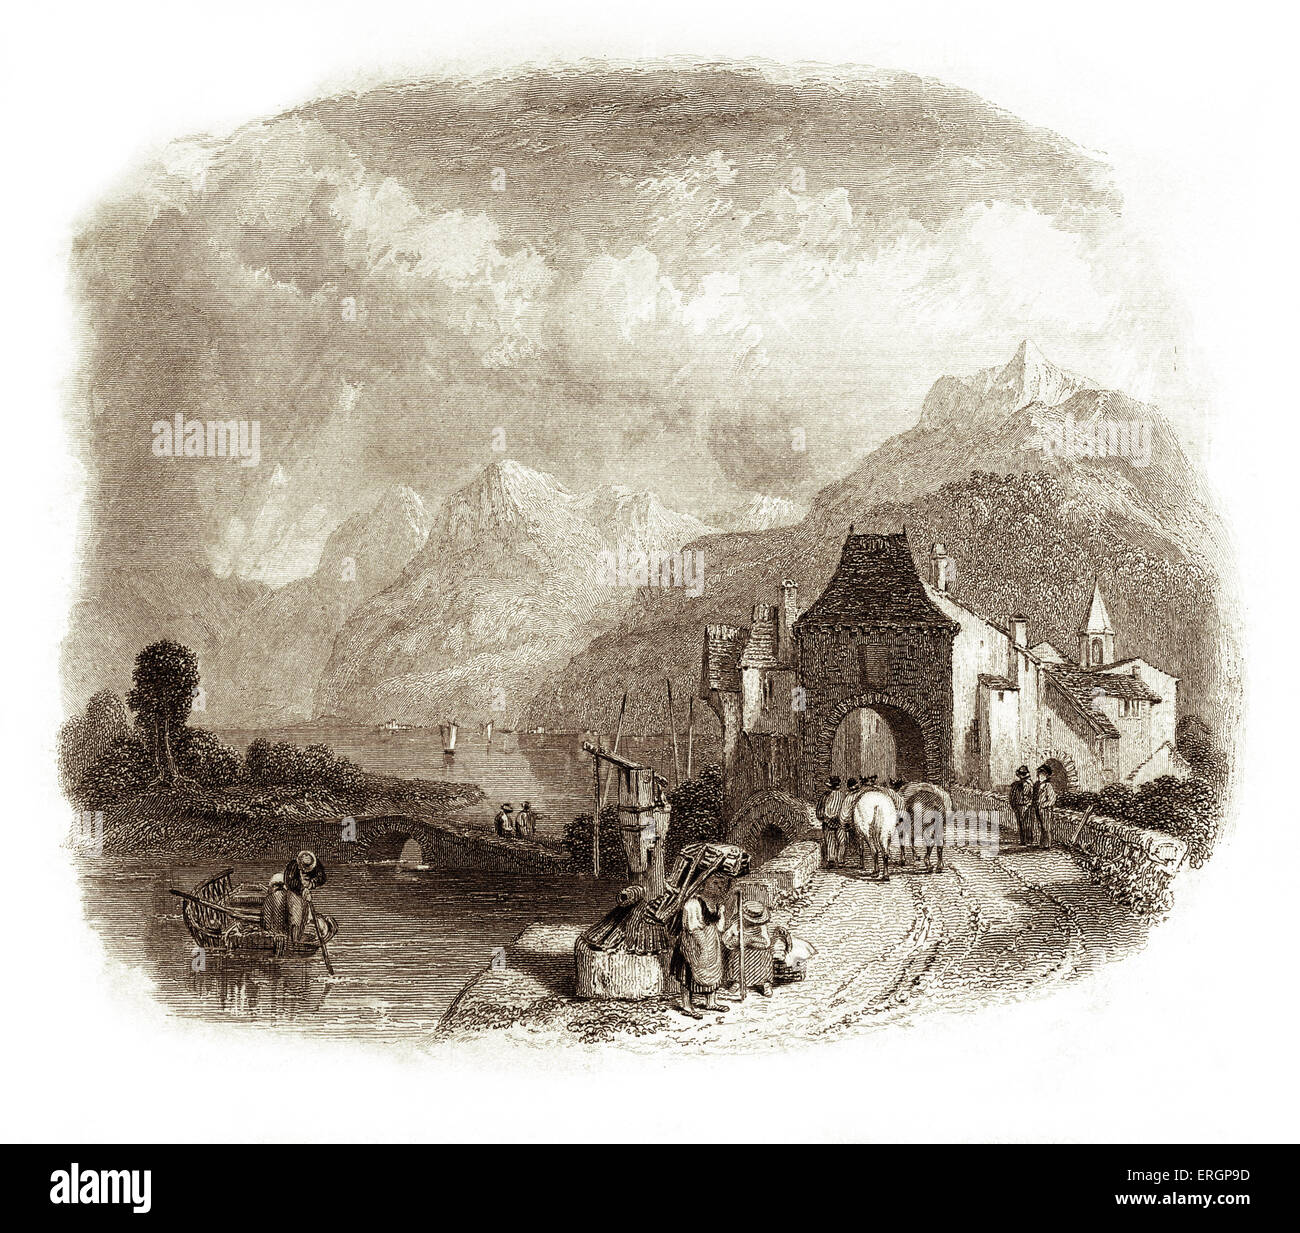 Approach to the Lake Geneva, Villeneuve, Switzerland. 19th century scene. After the engraving by E.Finden, after the drawing by Stock Photo